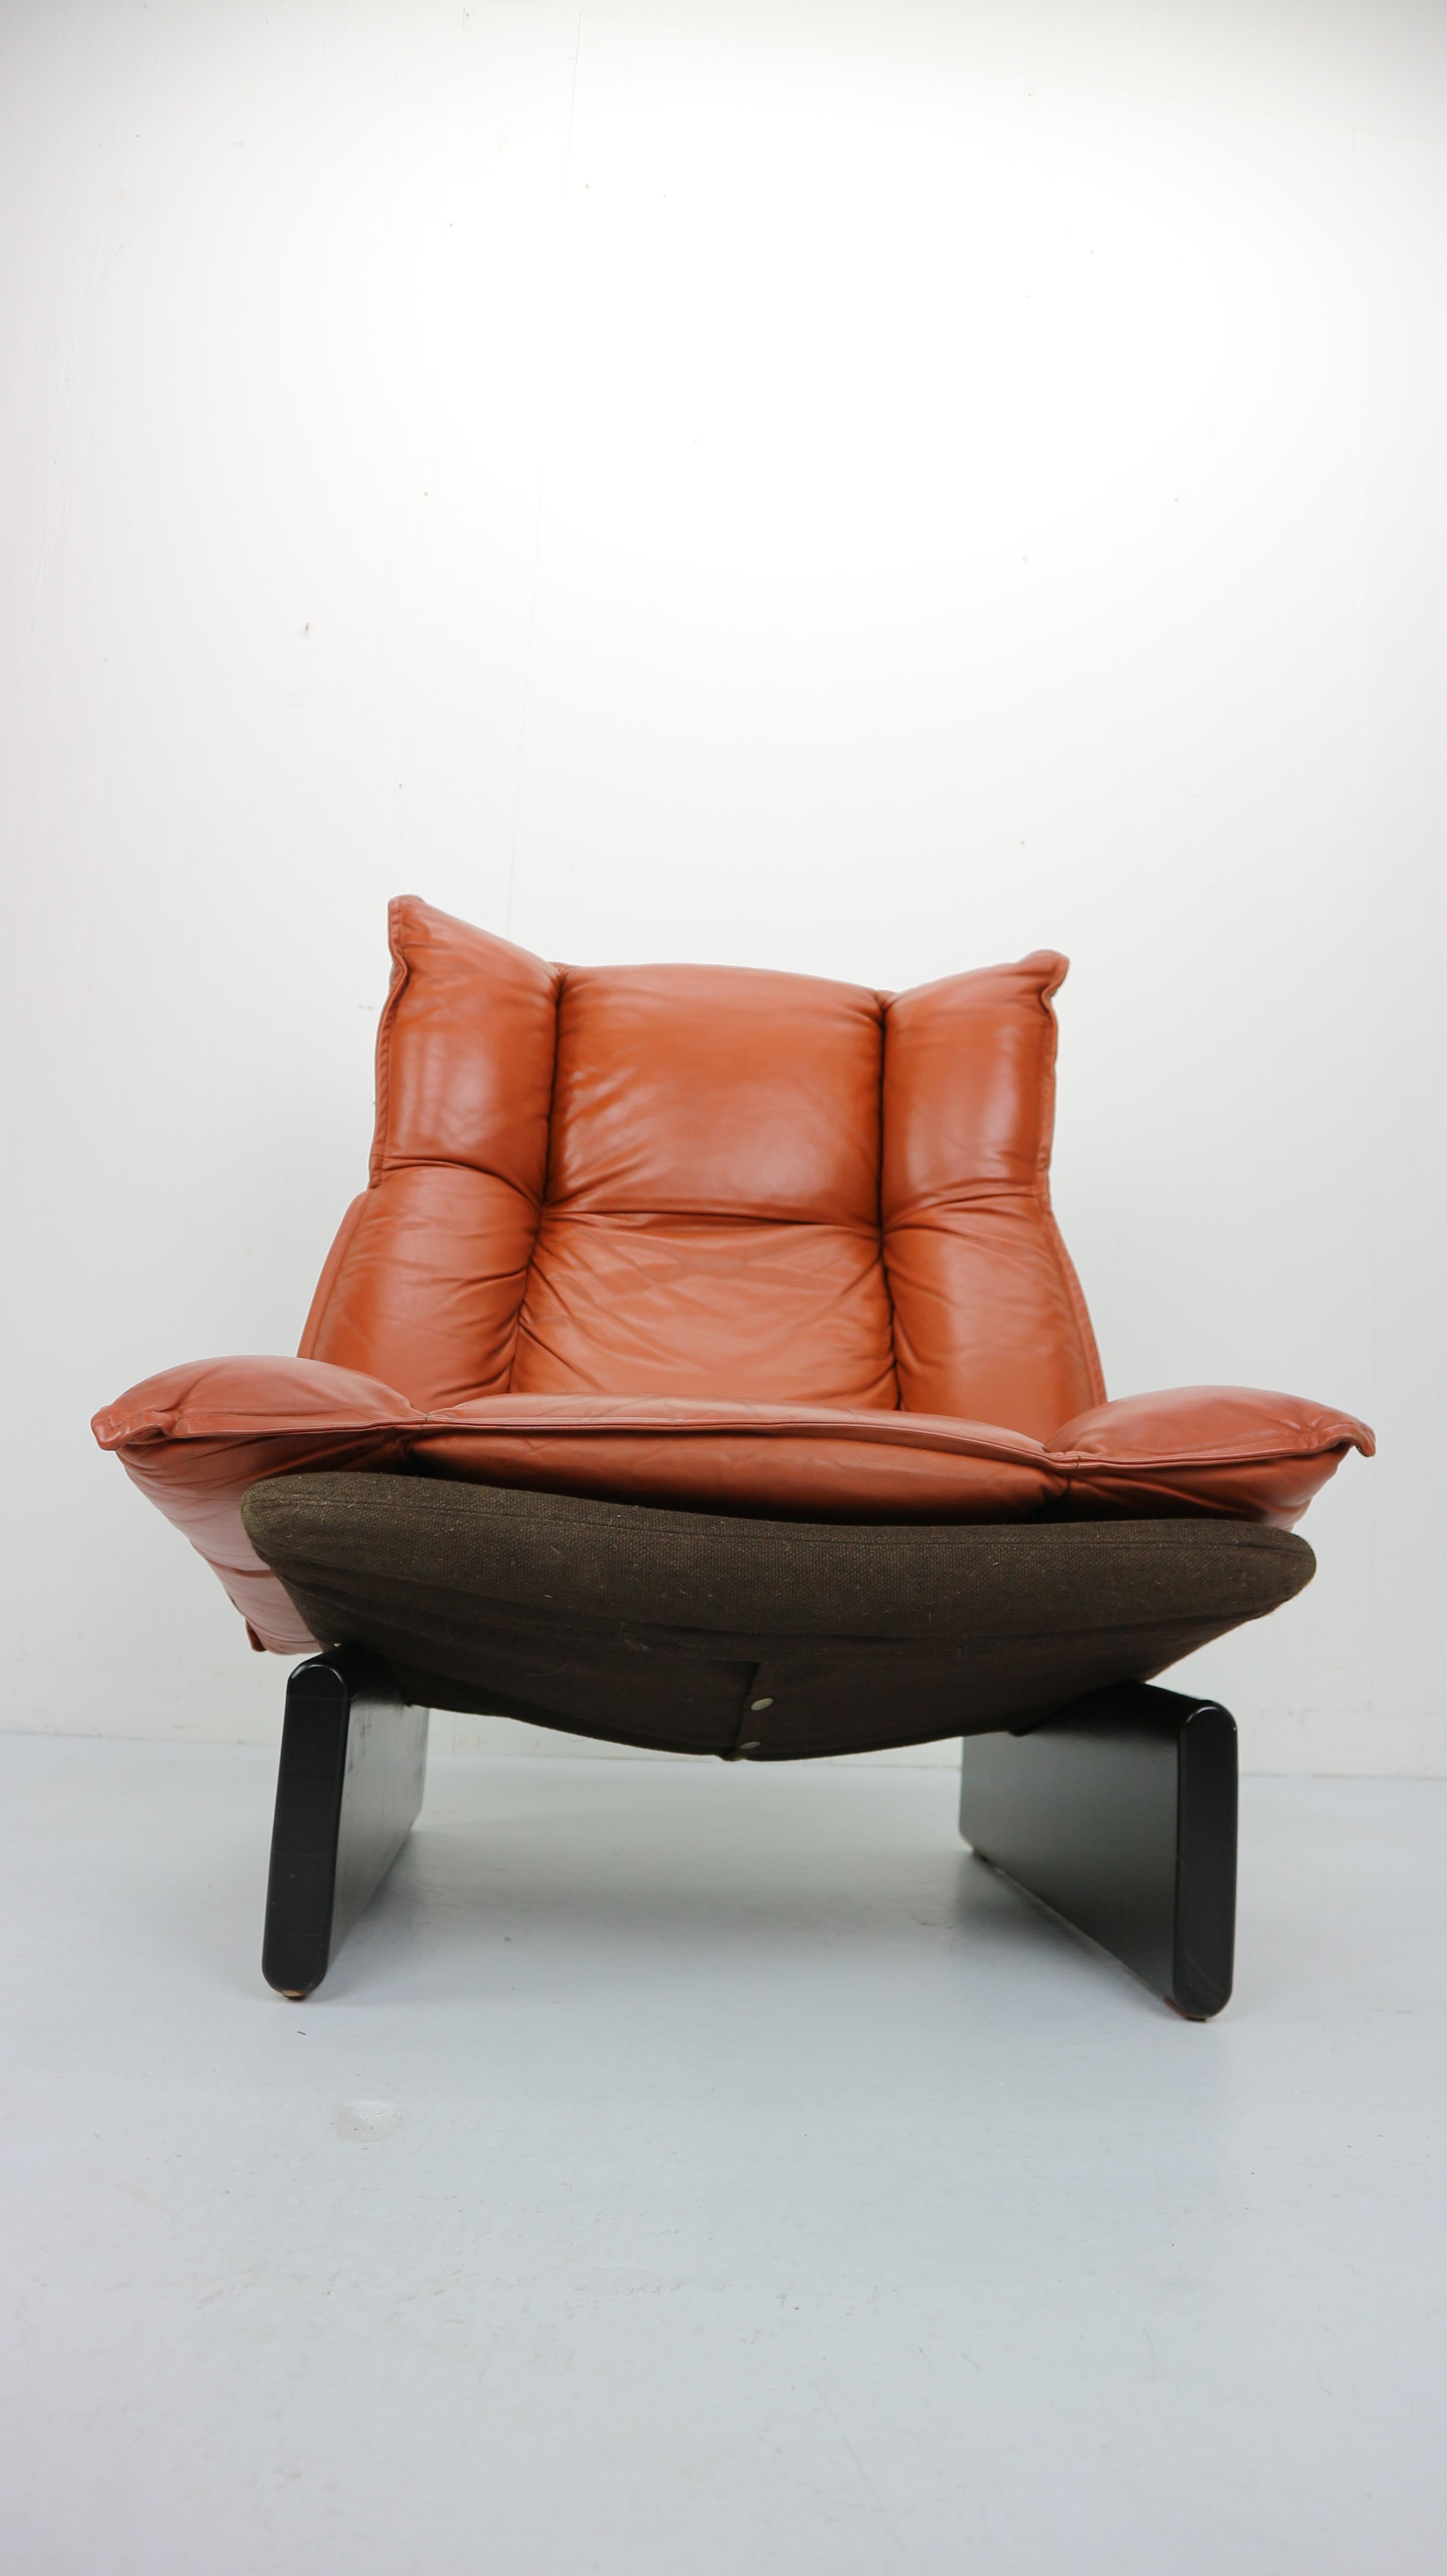 Late 20th Century Cognac Leather and Wood Lounge Chair, Dutch Modern Design, 1970s